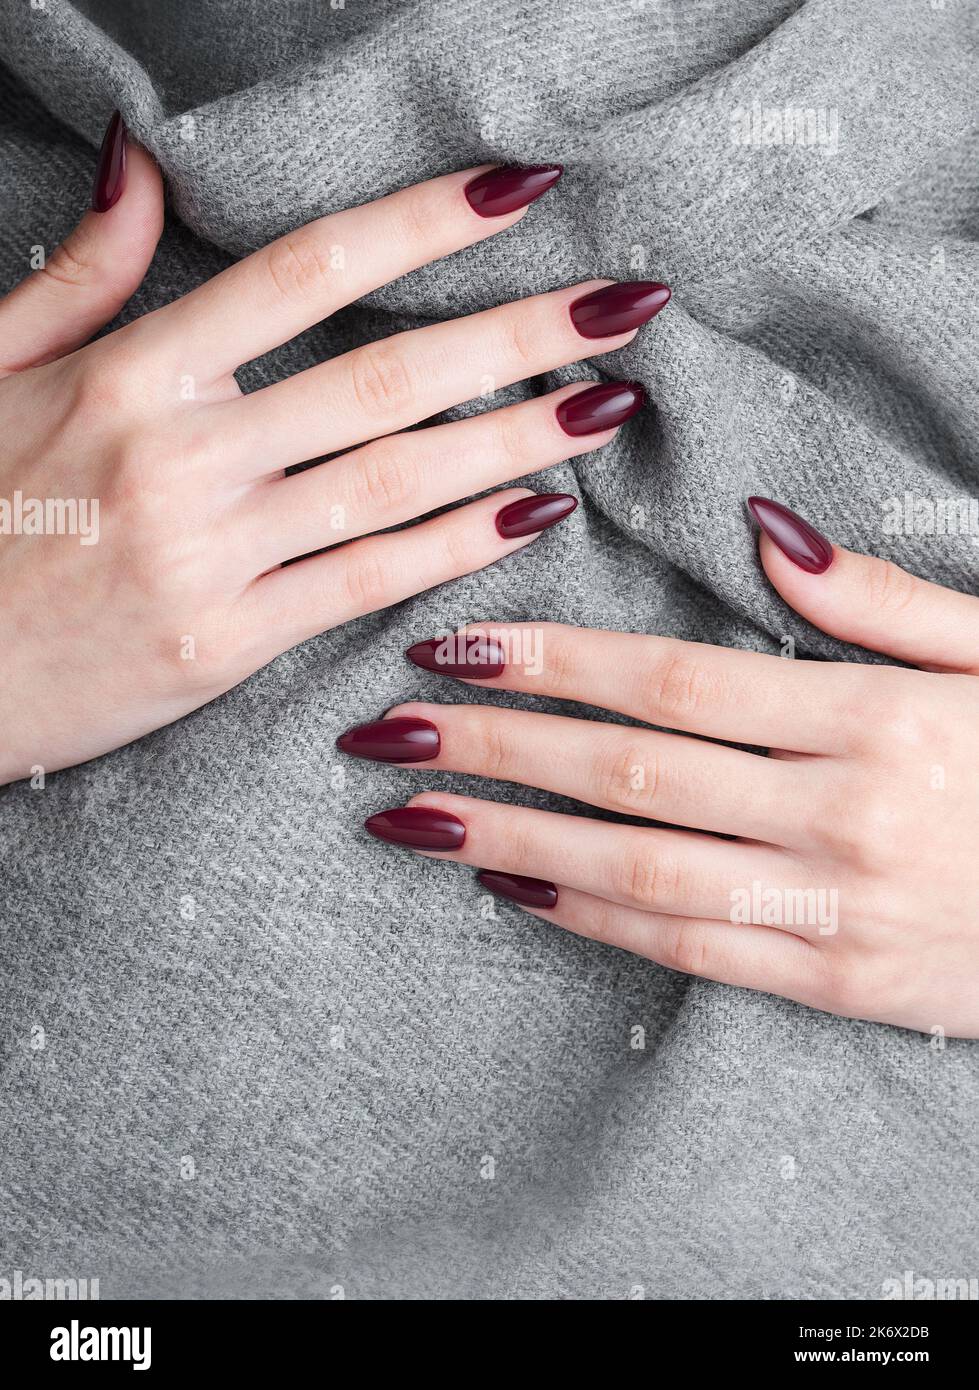 60 Dark Nails for Winter | Art and Design